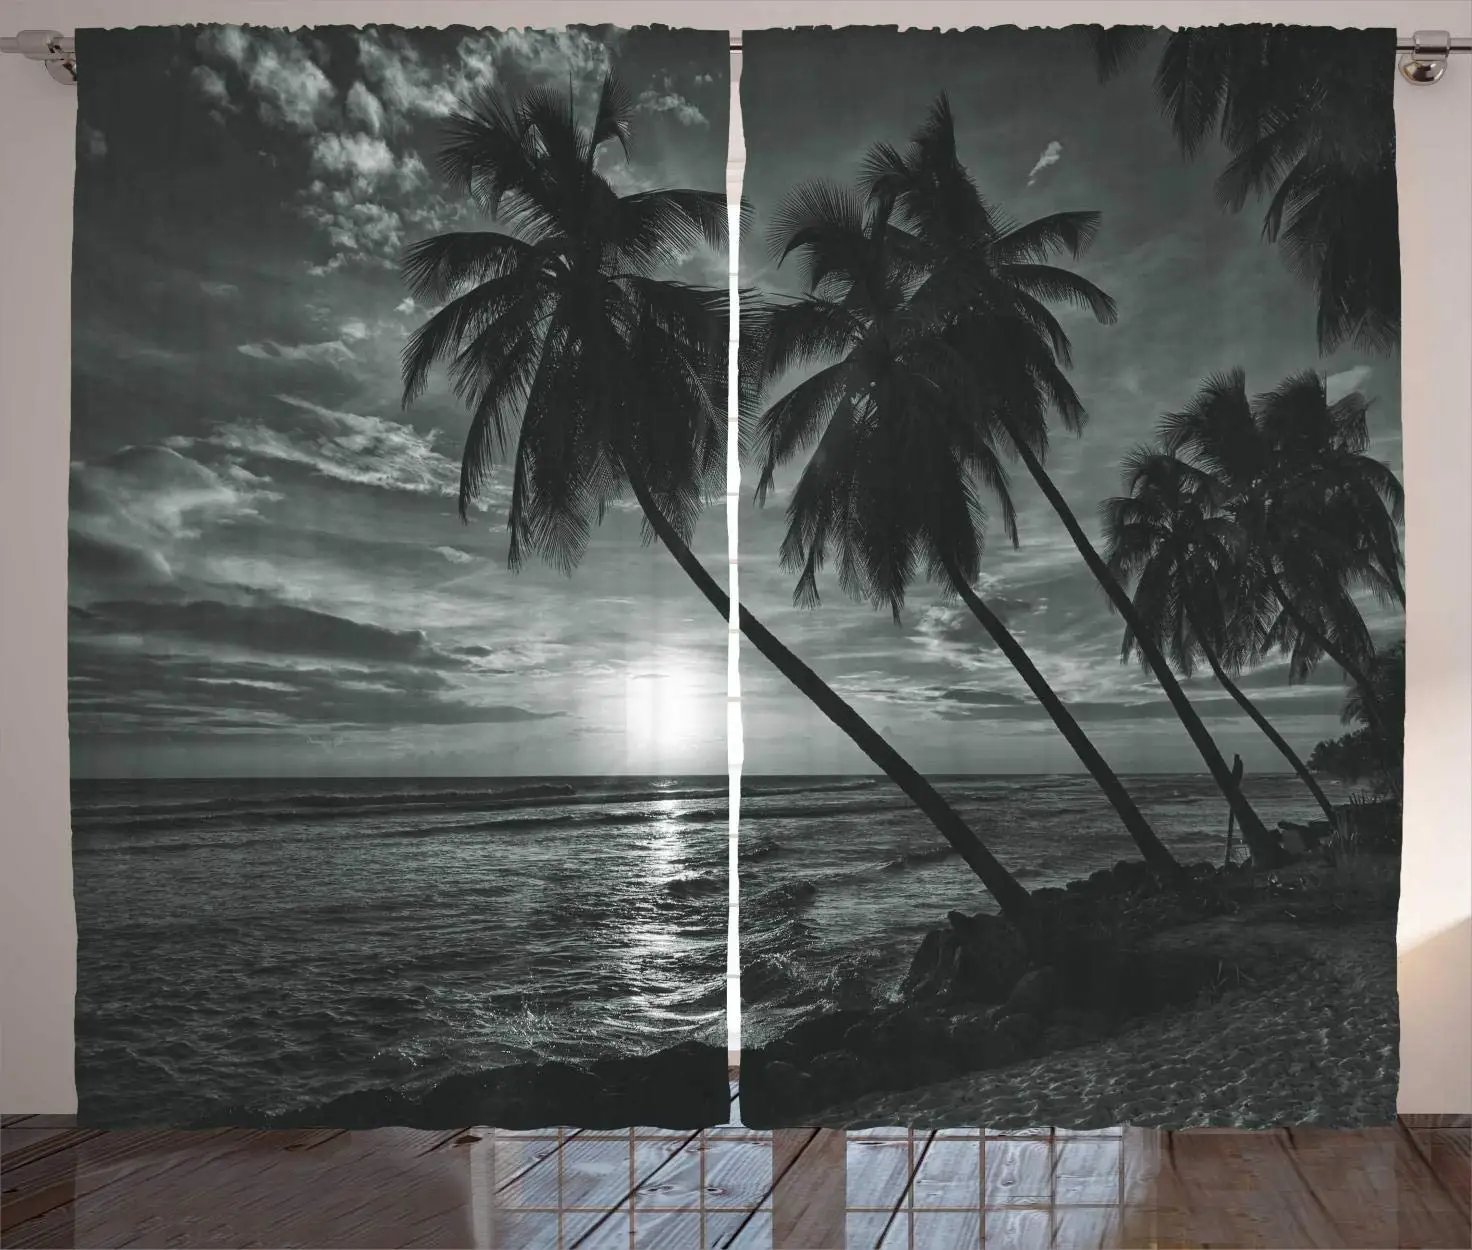 

Tropical Blackout Curtains Coconut Palm Trees on Beach Bend by The Wind Horizon Over The Sea Picture Window Curtain